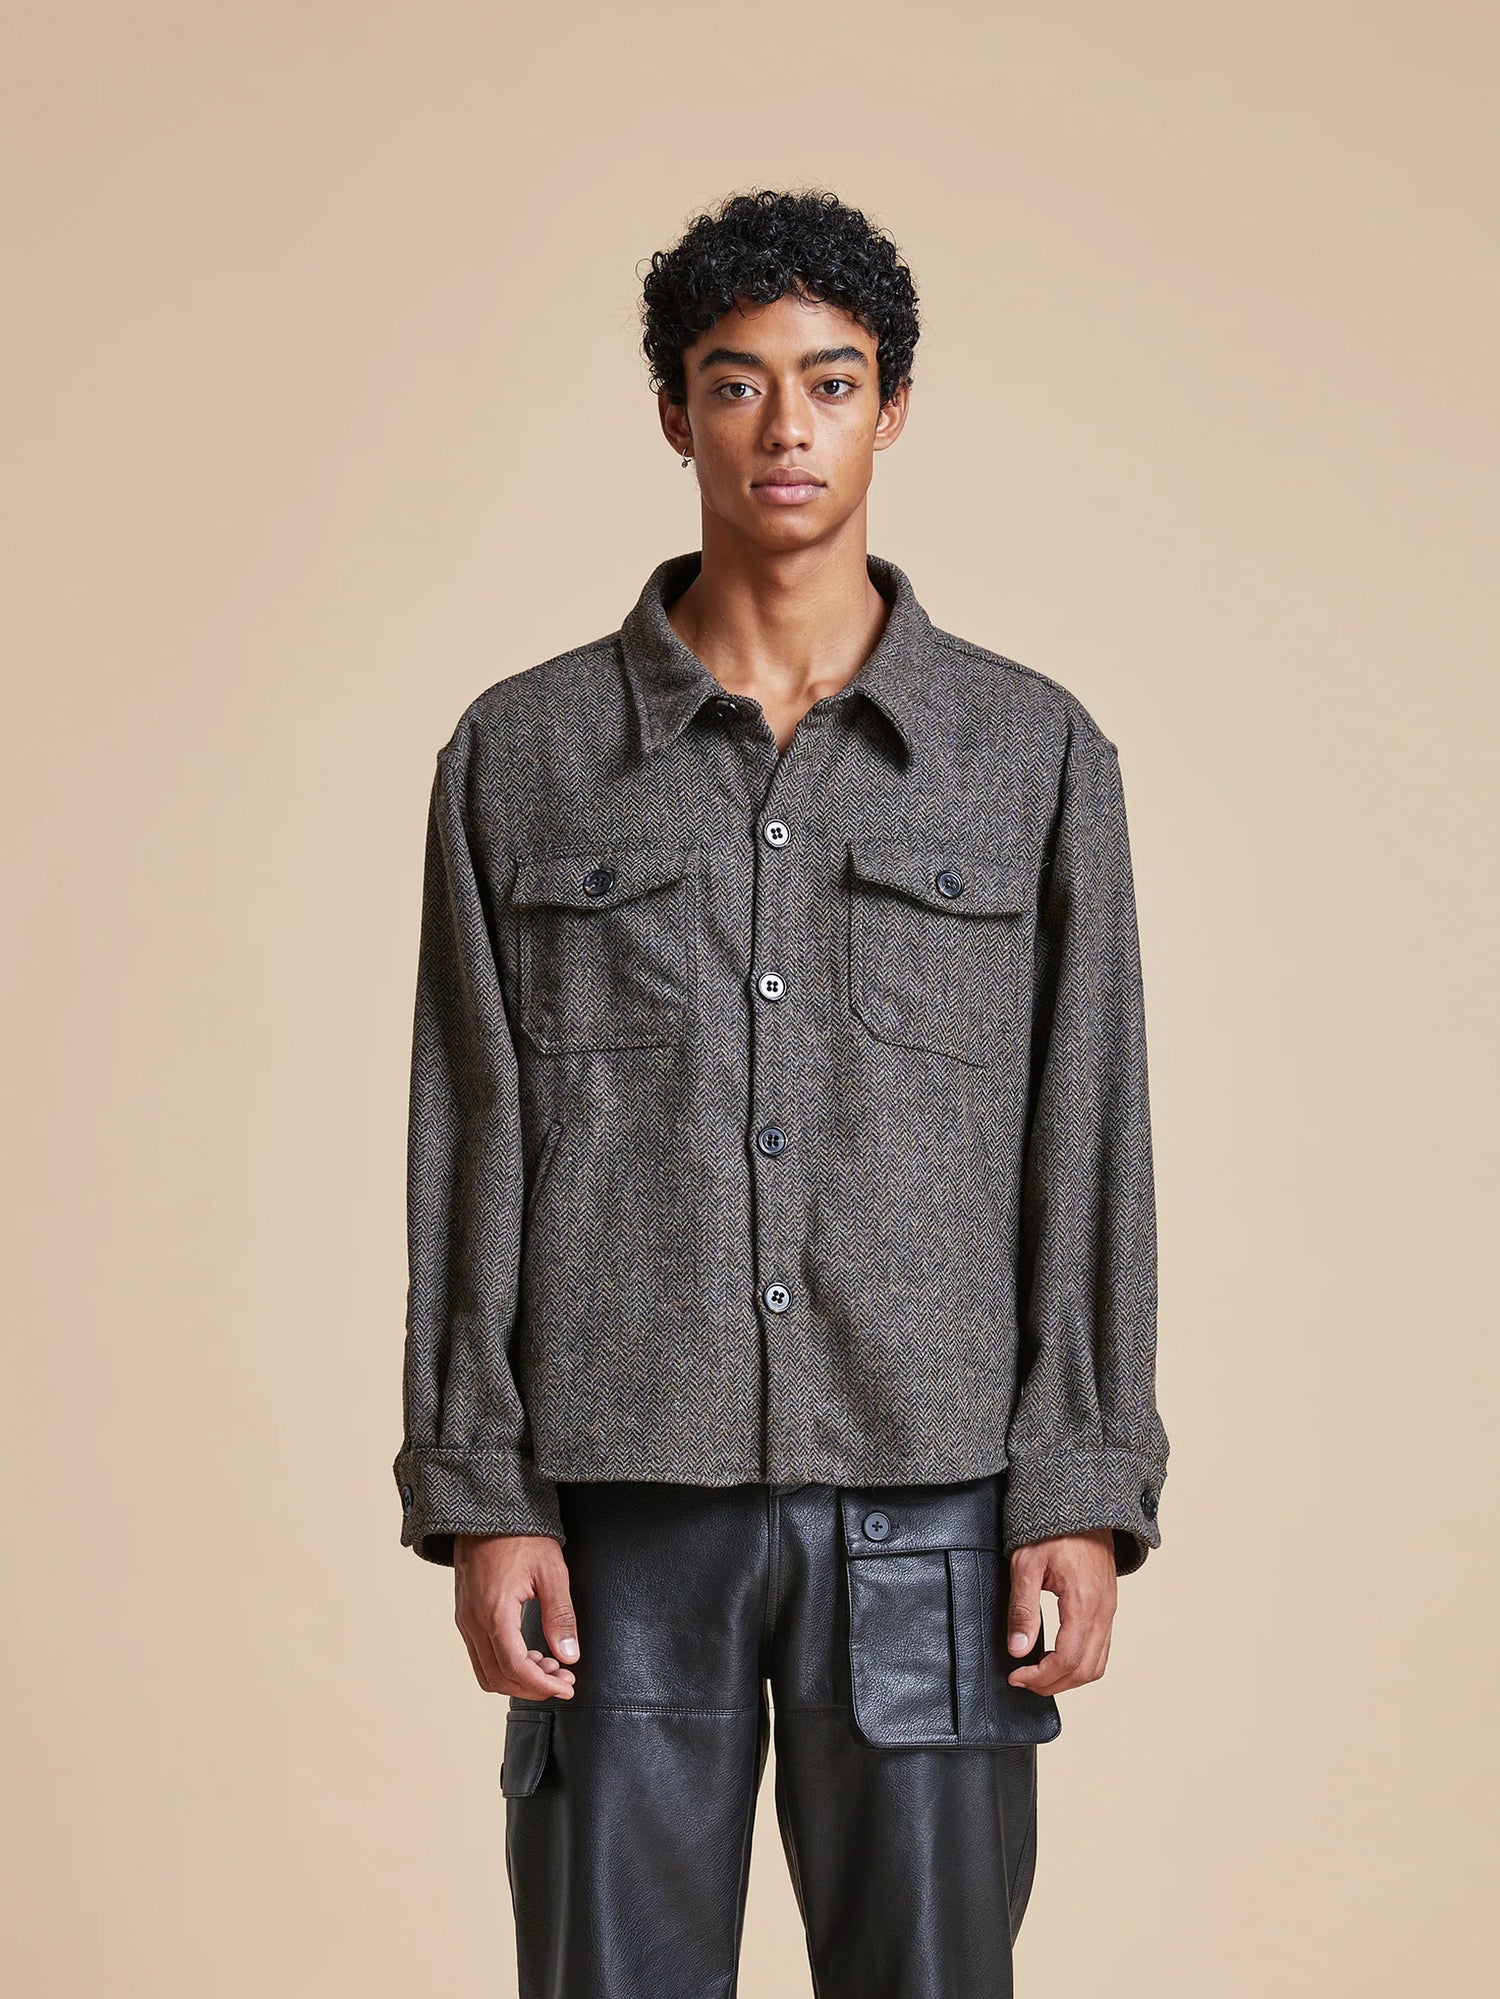 The model is wearing a Found Raven Herringbone Overshirt, a wardrobe staple for layering, with leather pants.